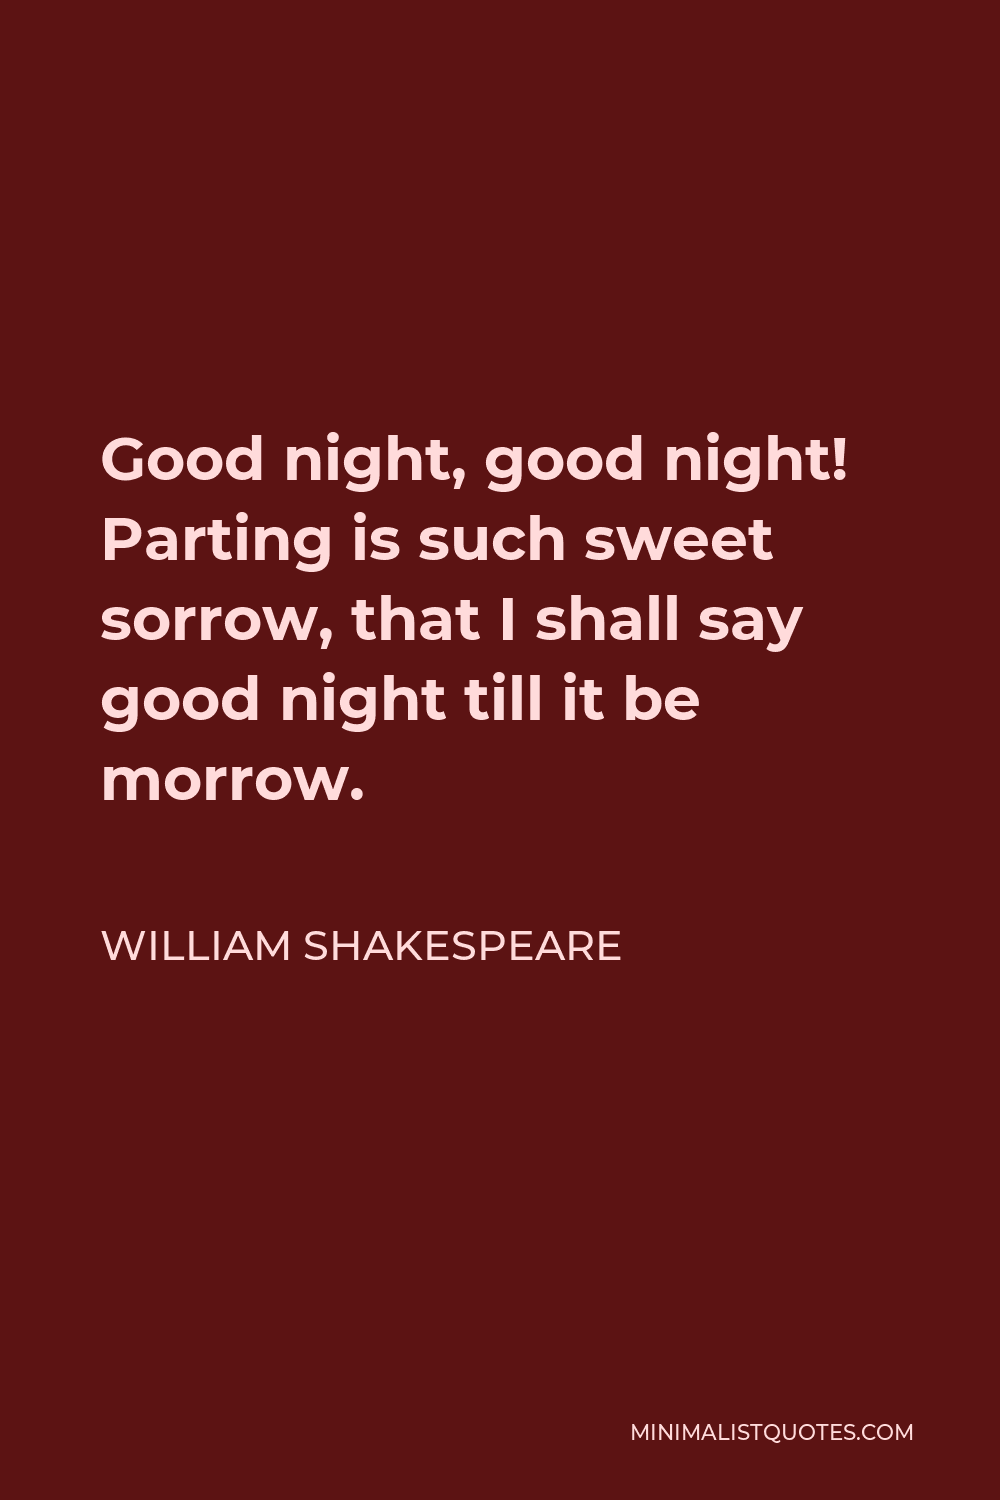 William Shakespeare Quote - Good night, good night! Parting is such sweet sorrow, that I shall say good night till it be morrow.